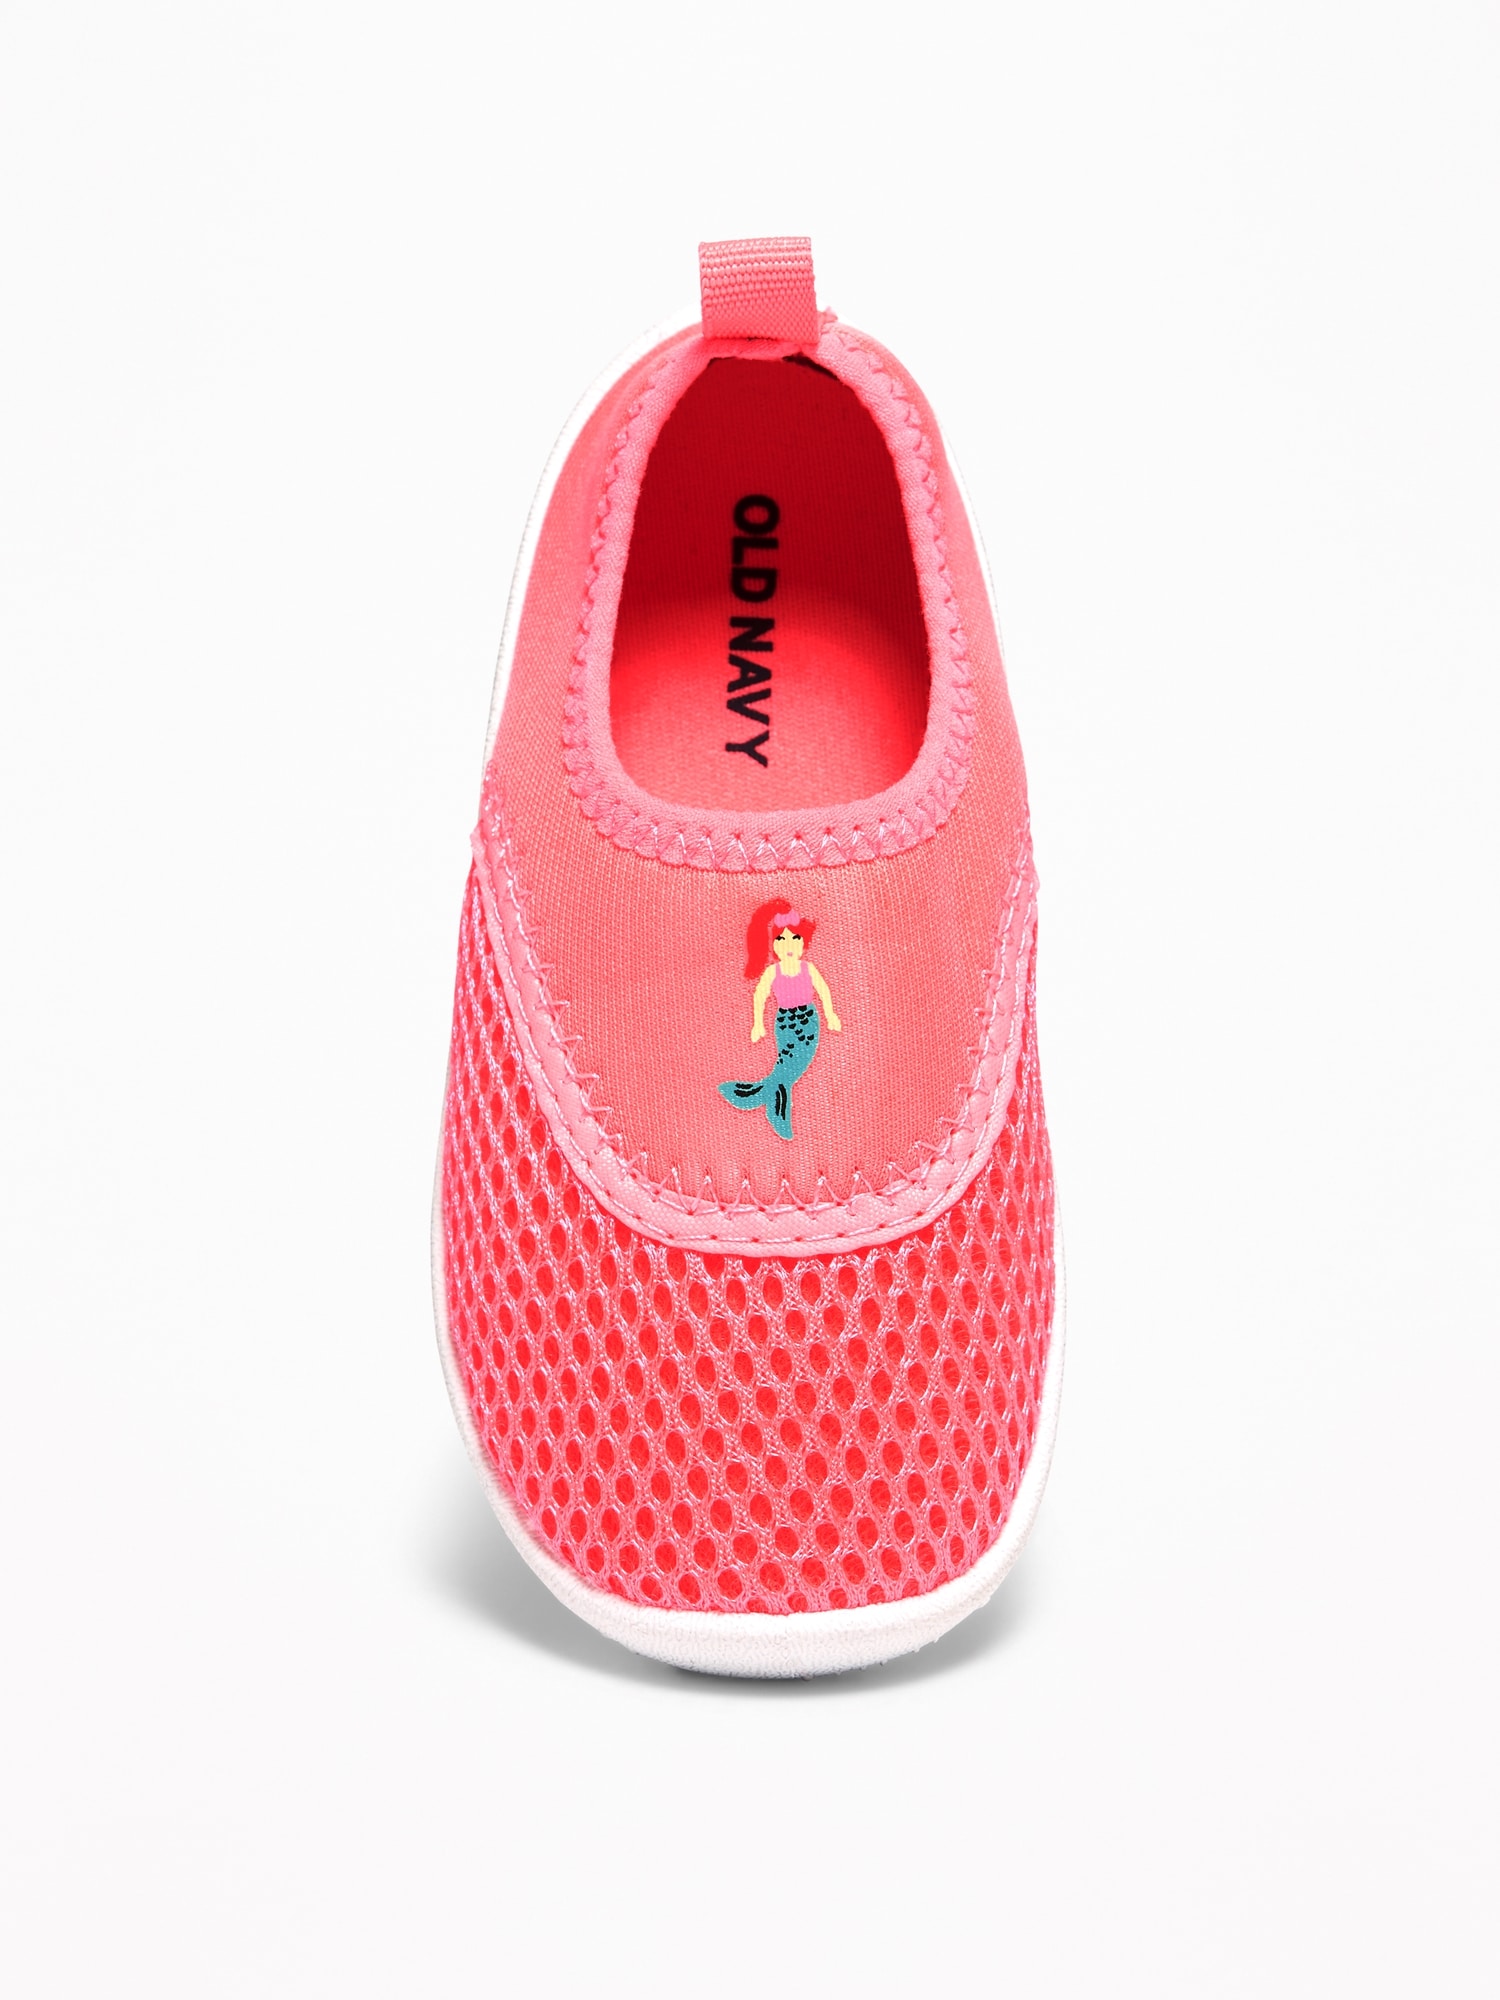 baby gap water shoes